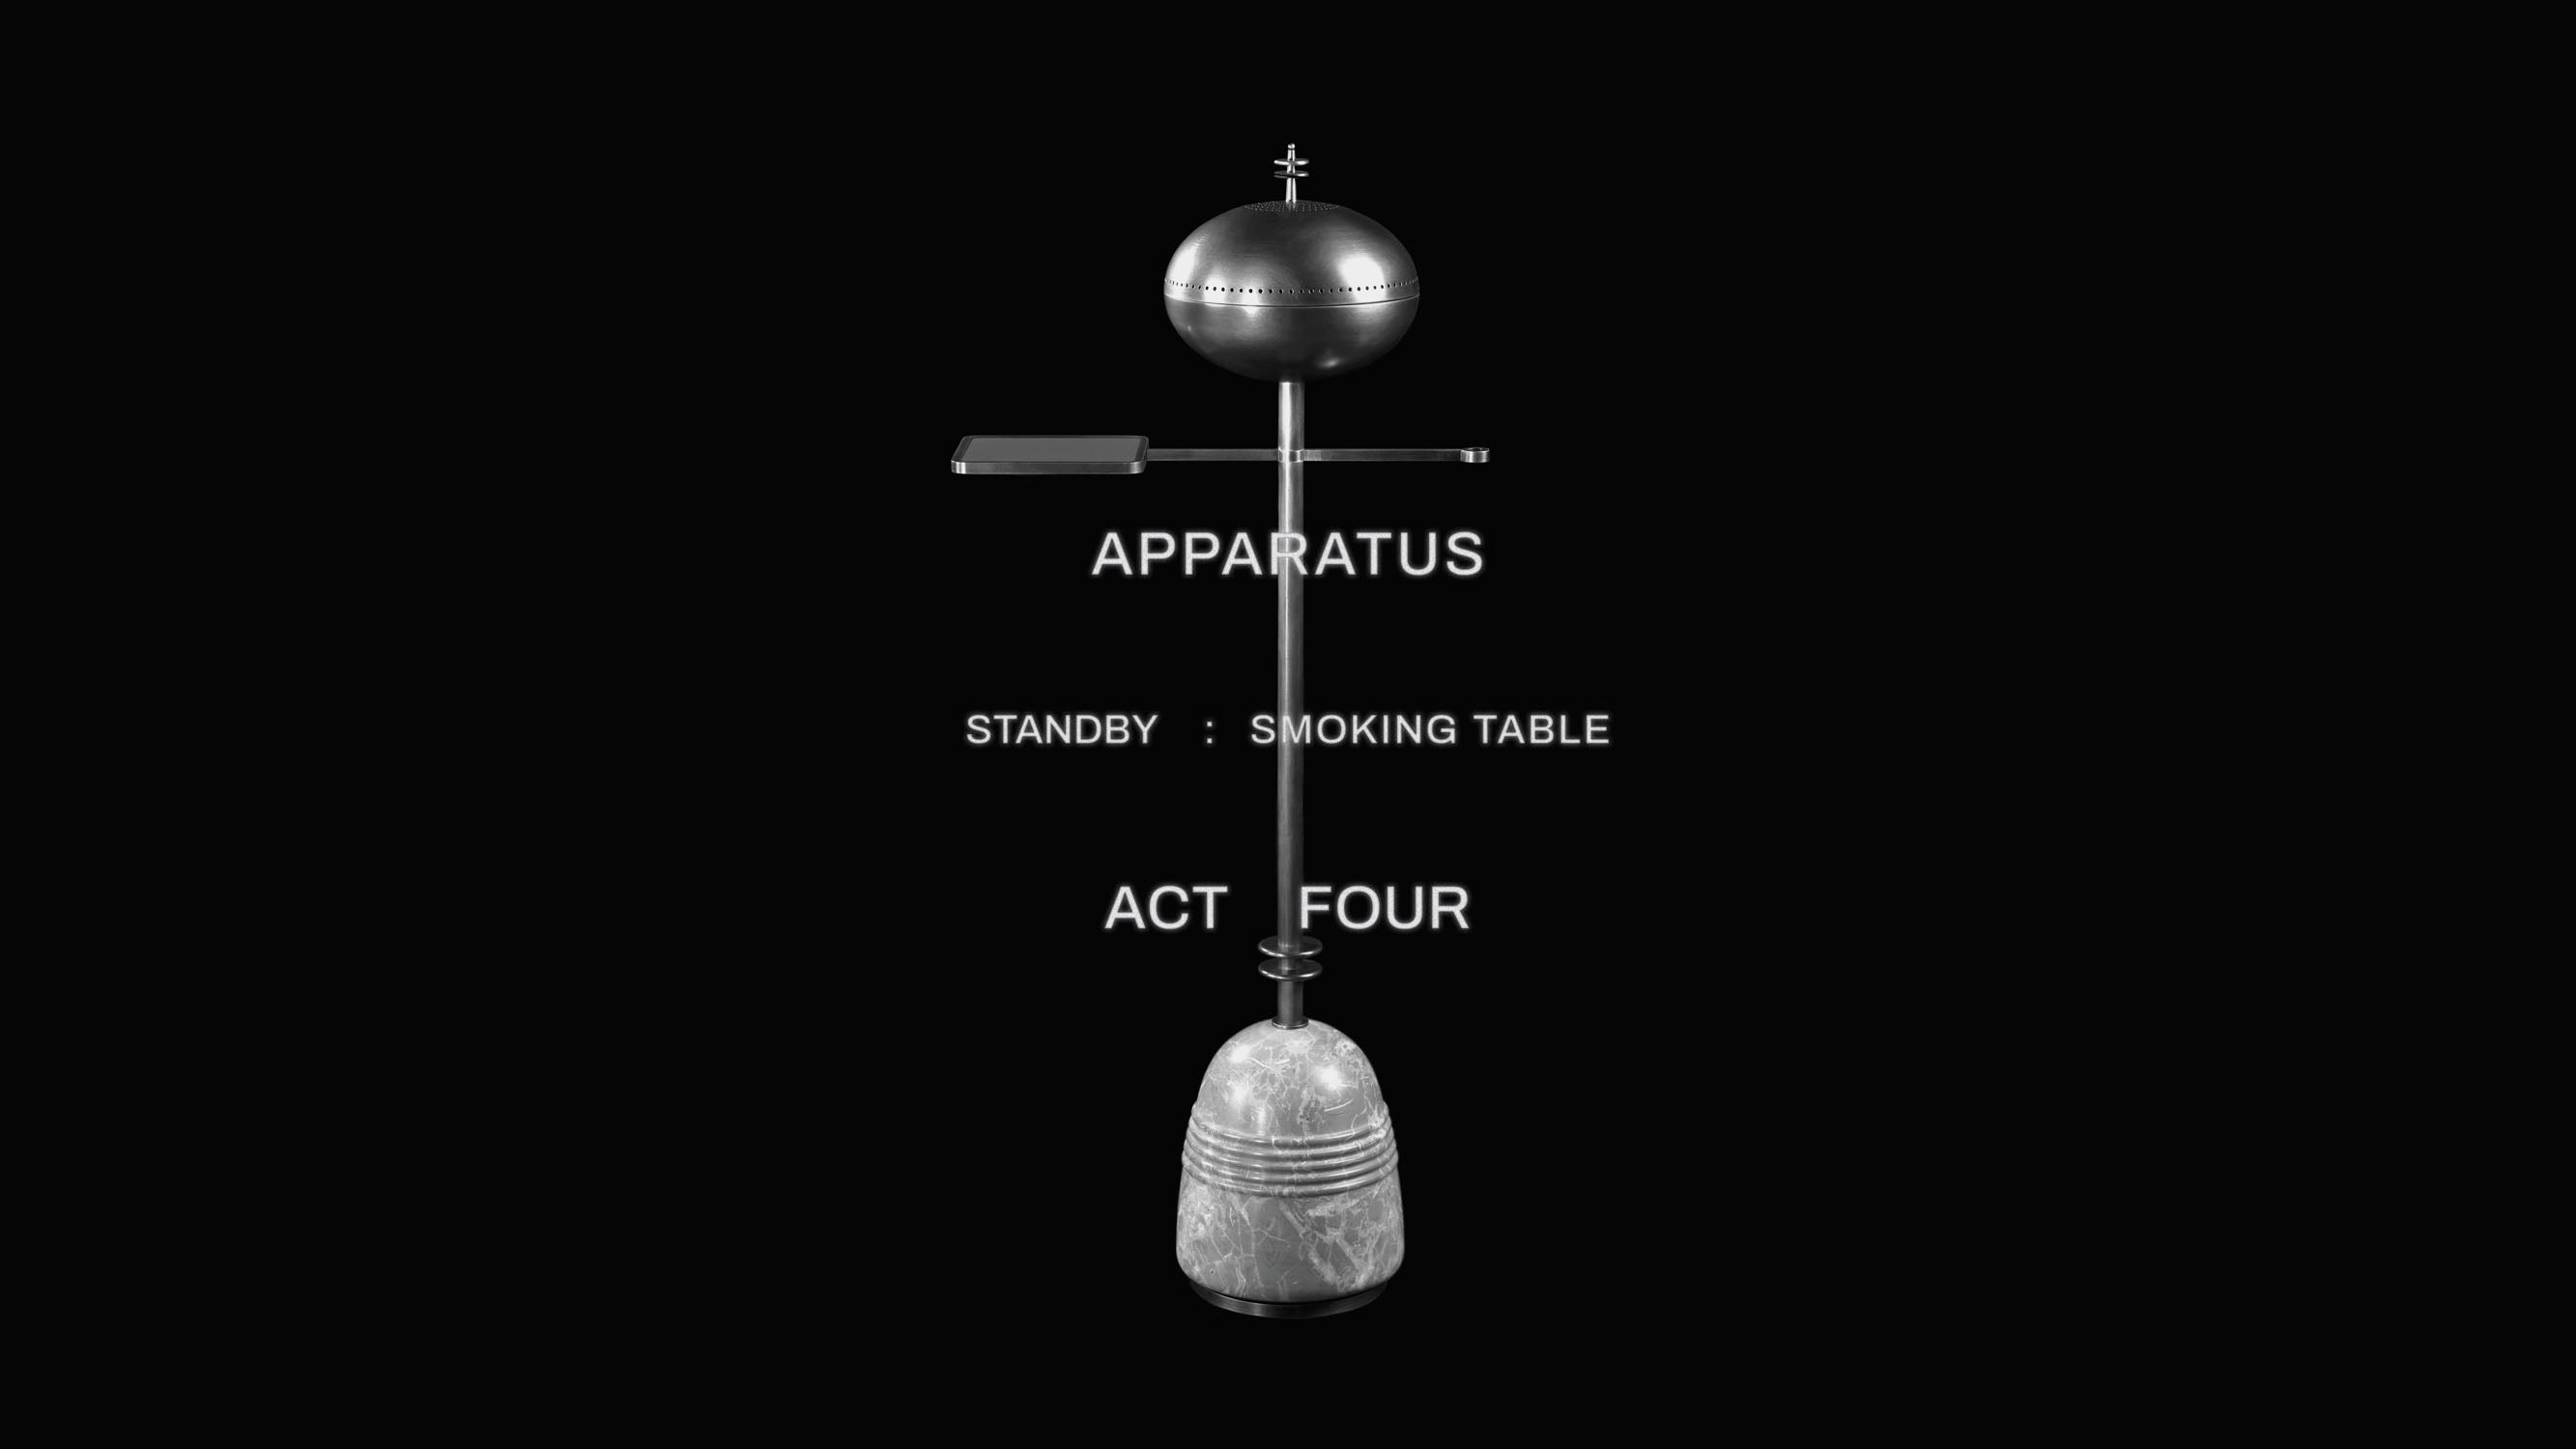 APPARATUS ACT FOUR includes STANDY : SMOKING TABLE. 